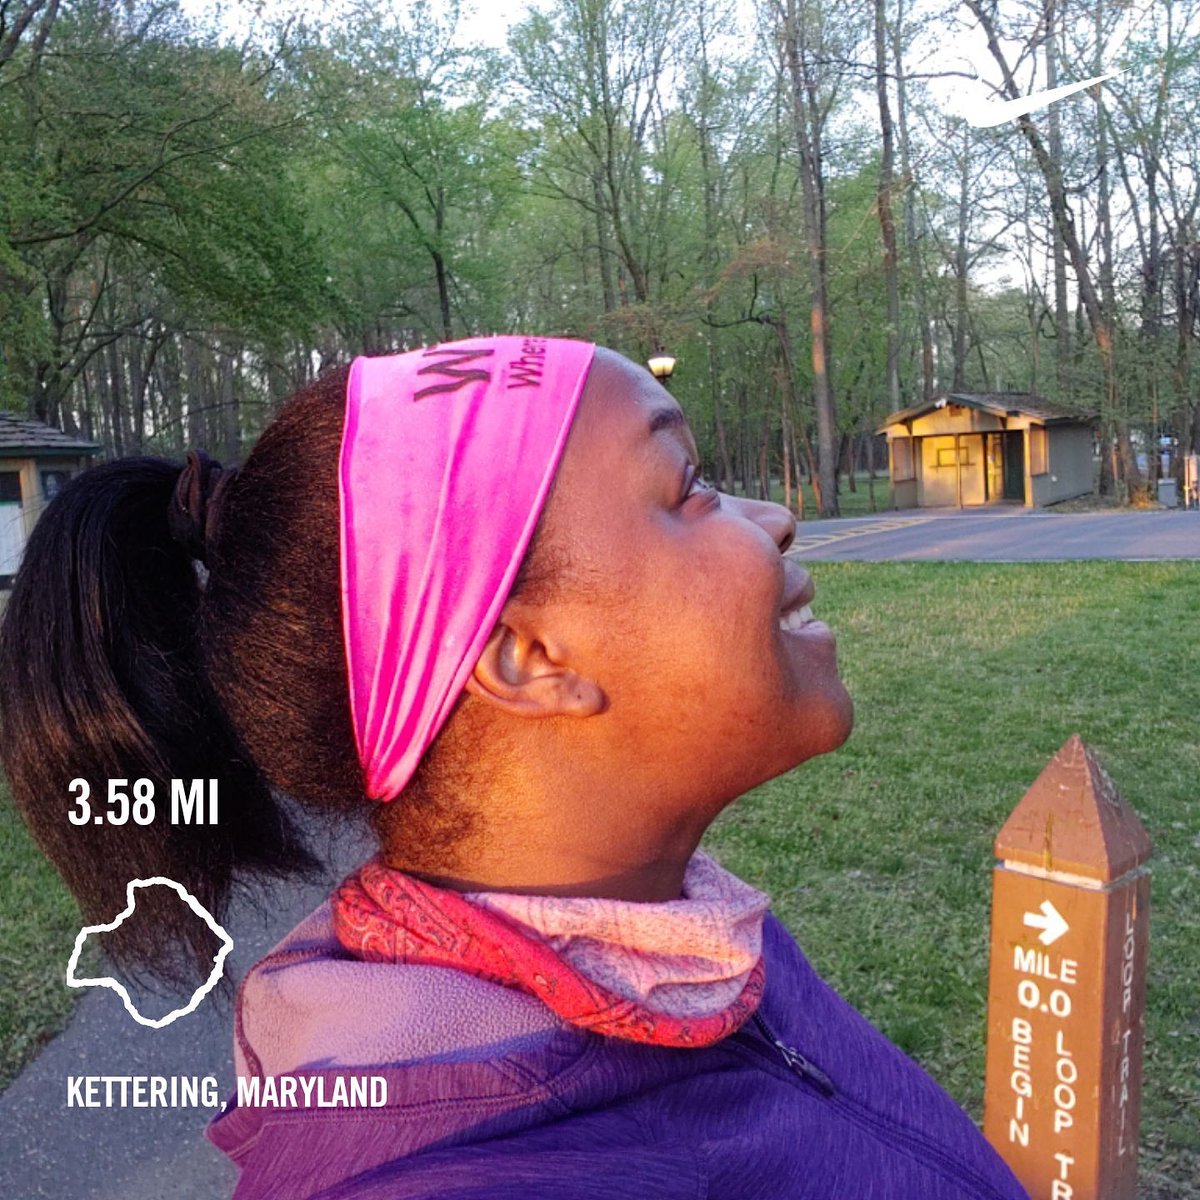  #NoFilter just focused on a few things. This is the moment when I was done and able to that bandana off to breathe normally again. I can't thank the parks people enough for allowing us to enjoy a little nature with  #SocialDistancing during this  #COVID19 crisis.  #RunnerGirl